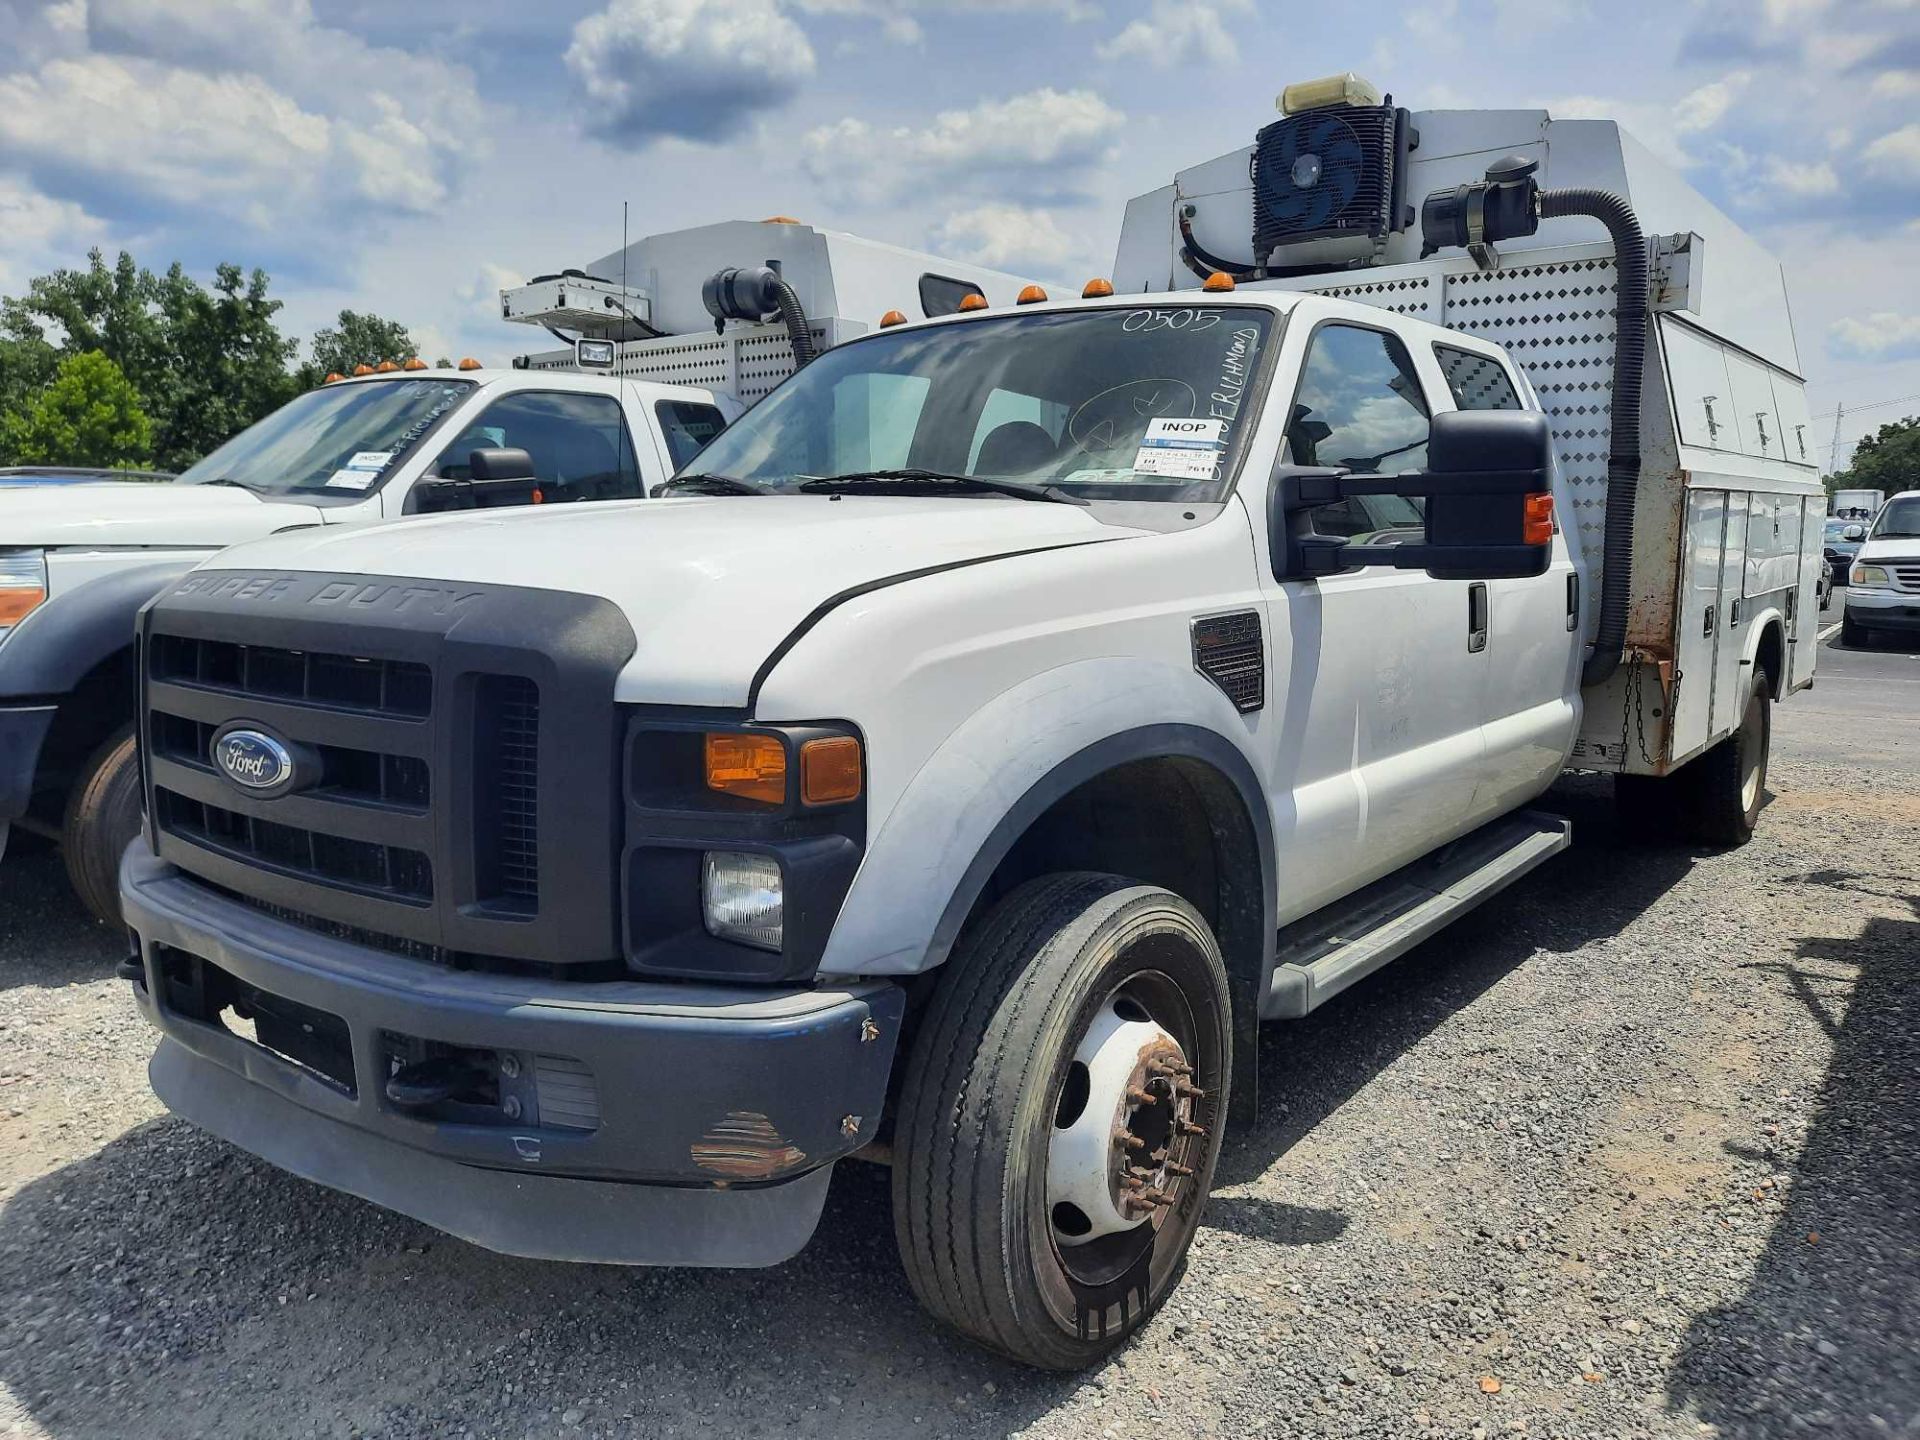 2009 Ford F550 Super Duty Service Truck - Image 2 of 64